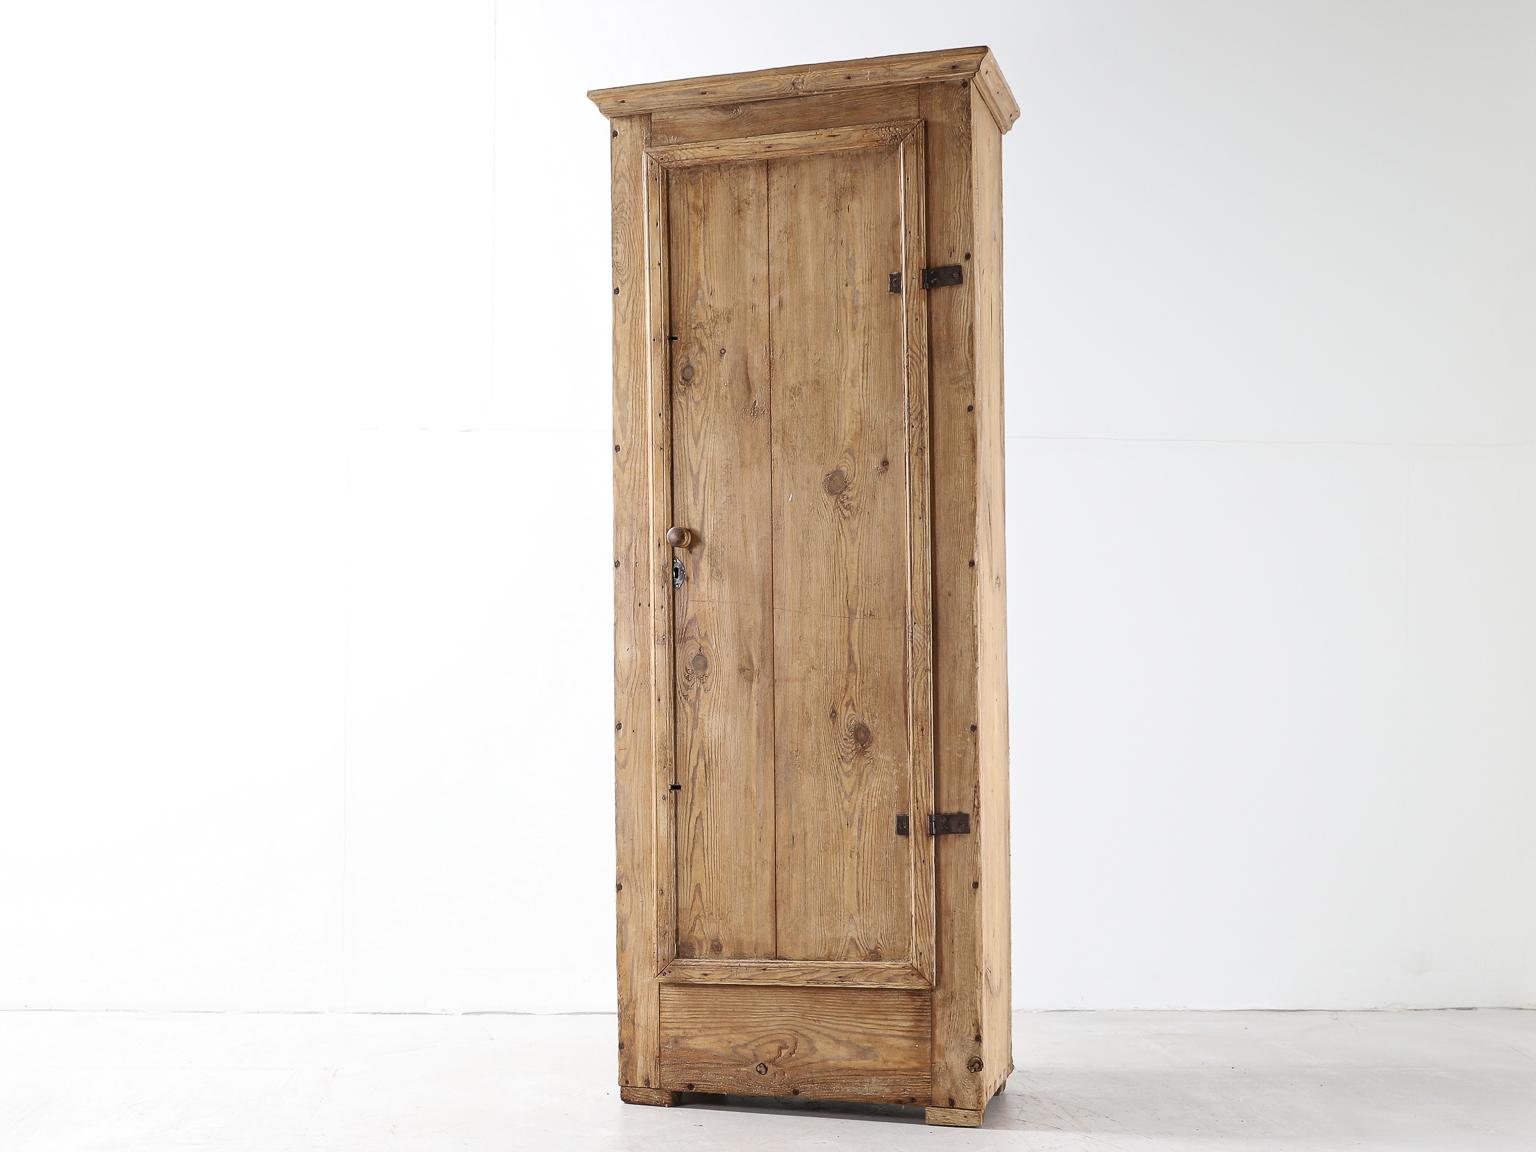 Early 19th century shepherds cupboard with dovetail joint details.